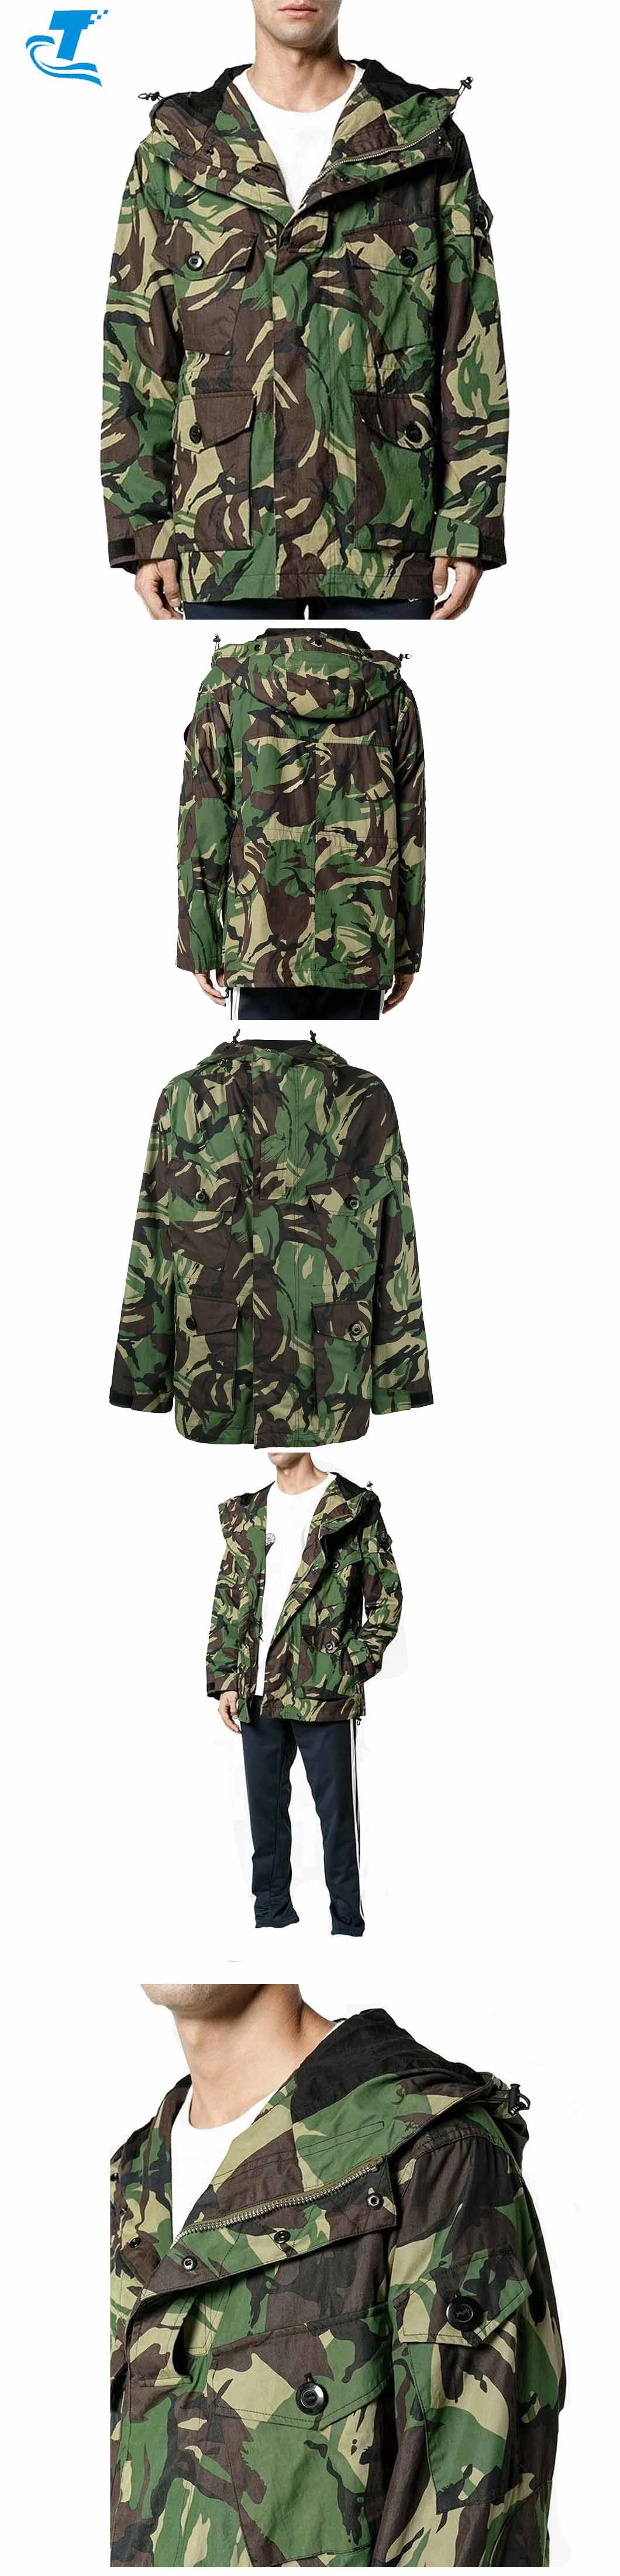 Mens Outdoor War Game Wears Camo Print Army Jacket Camouflage Jacket Military Uniform Jacket